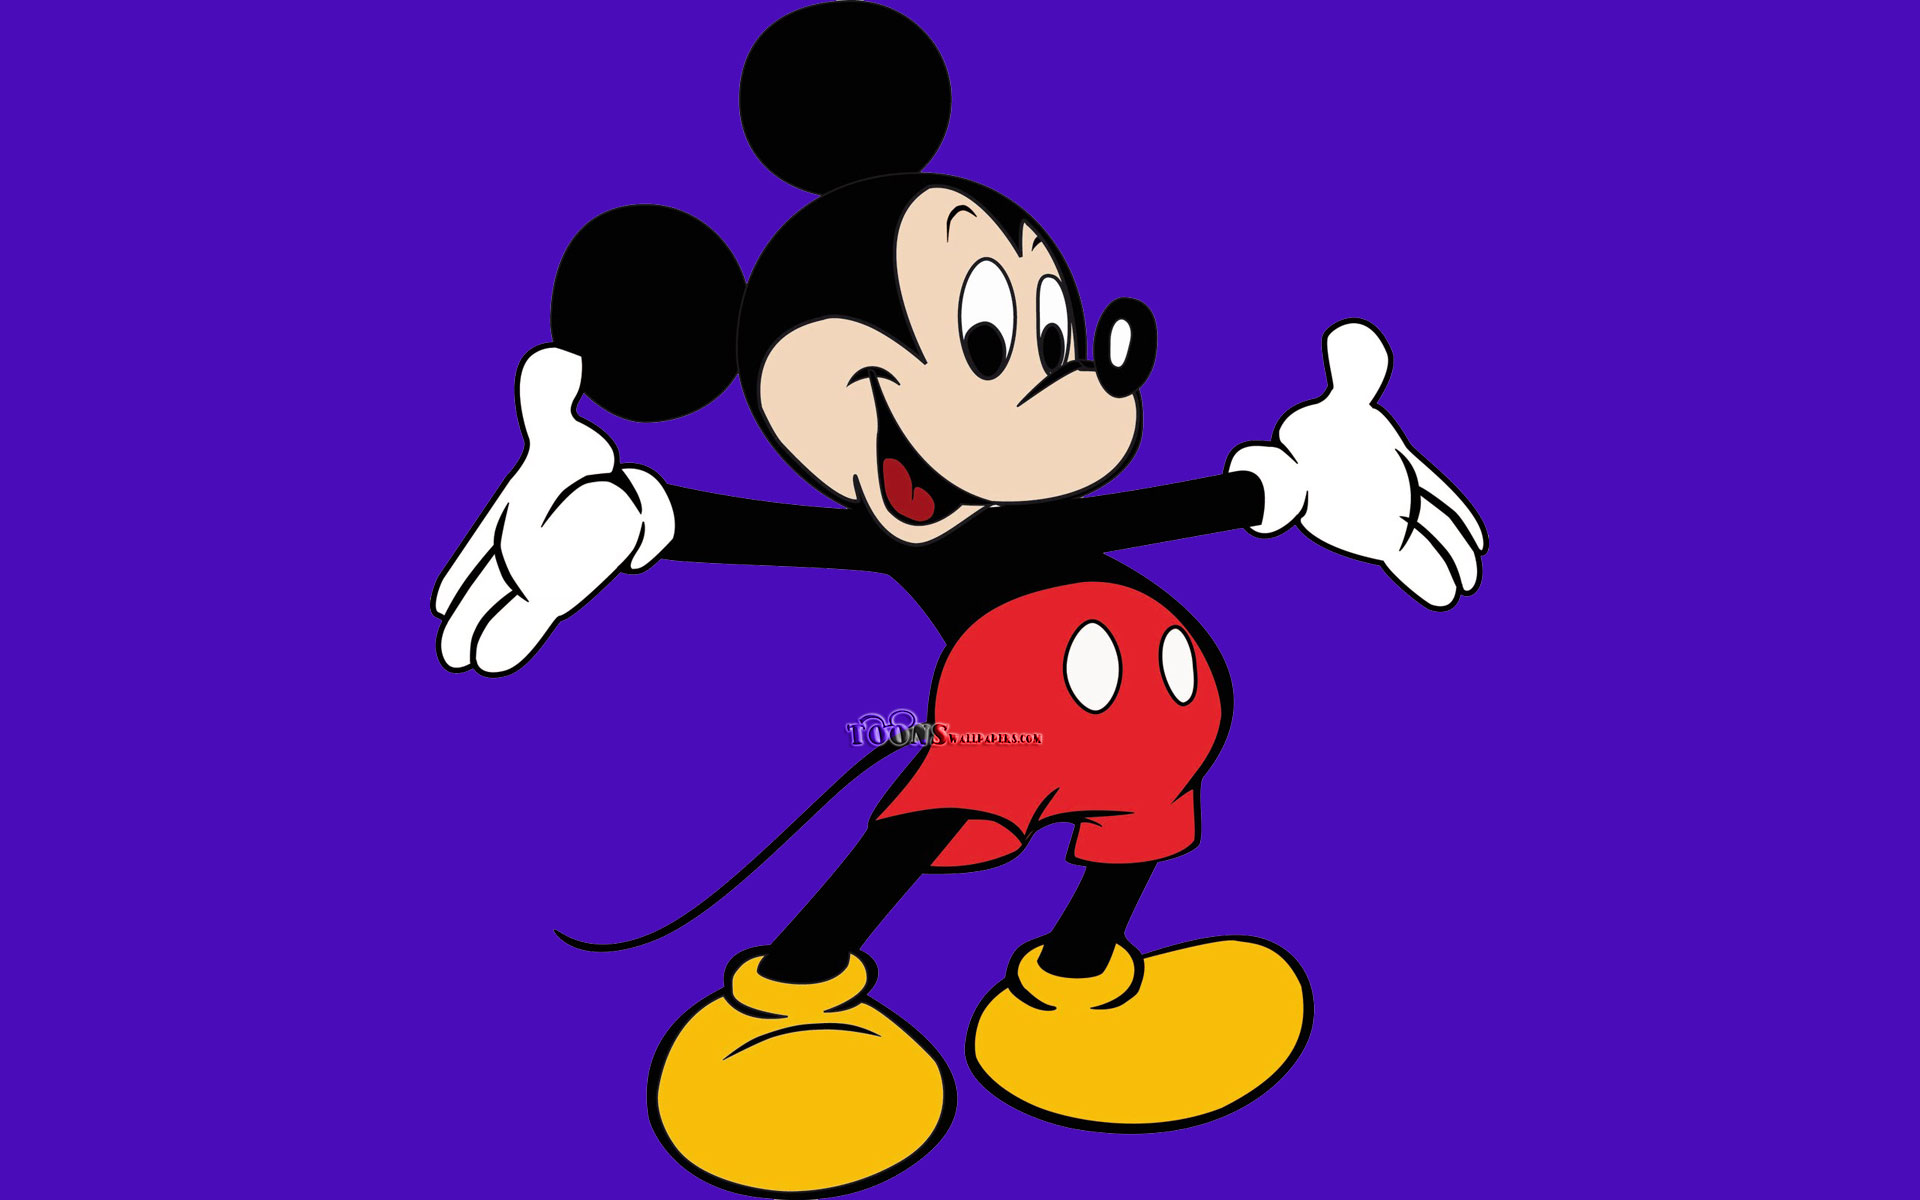 Free Mickey Mouse Cartoon Images, Download Free Mickey Mouse Cartoon